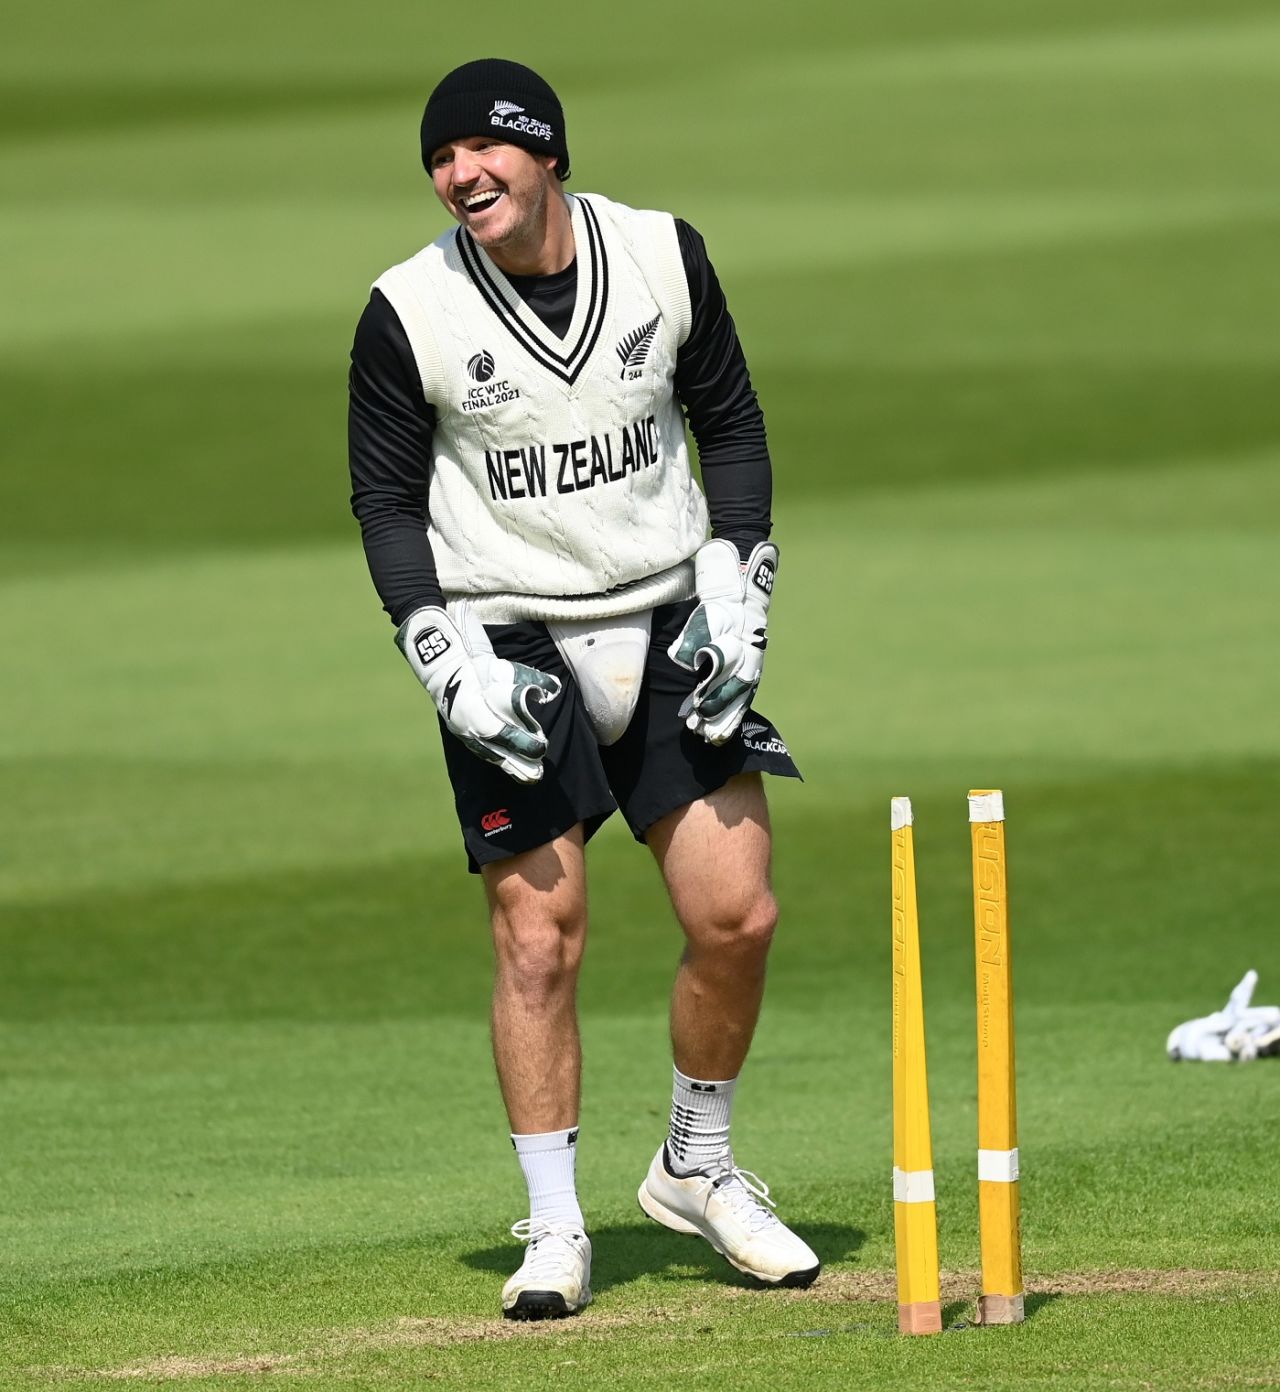 BJ Watling finds a reason to smile during a keeping drill, Lord's, May 31, 2021